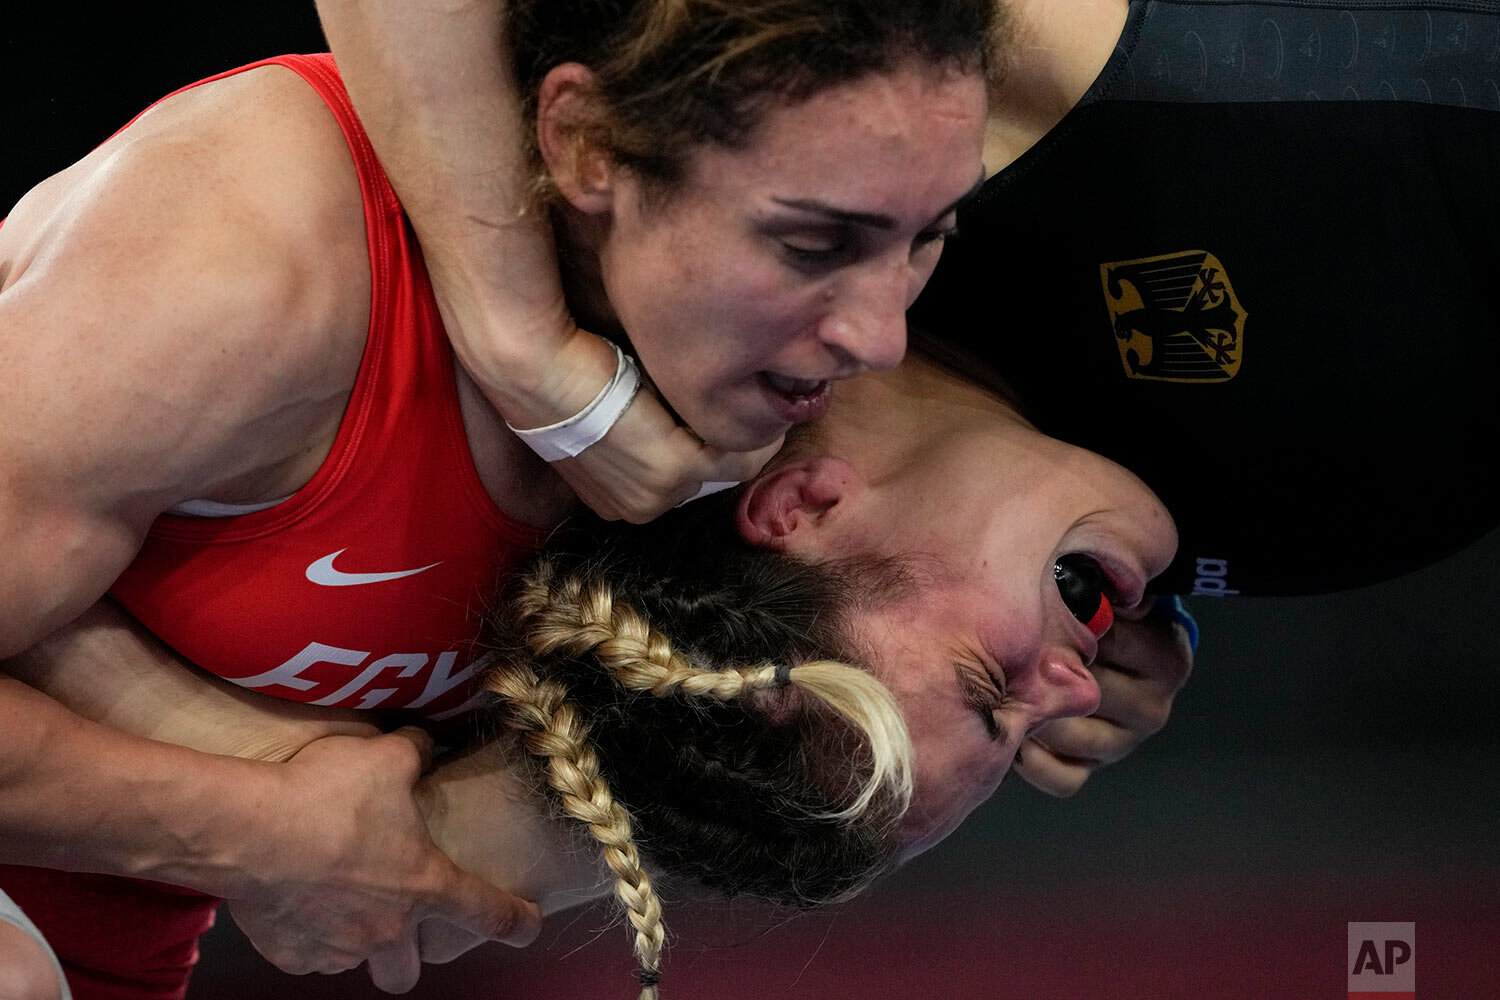  Germany's Anna Carmen Schell, right, reacts during her batlle against Egypt's Enas Ahmed at the women's 68kg freestyle wrestling match at the 2020 Summer Olympics, Monday, Aug. 2, 2021, in Chiba, Japan. (AP Photo/Aaron Favila) 